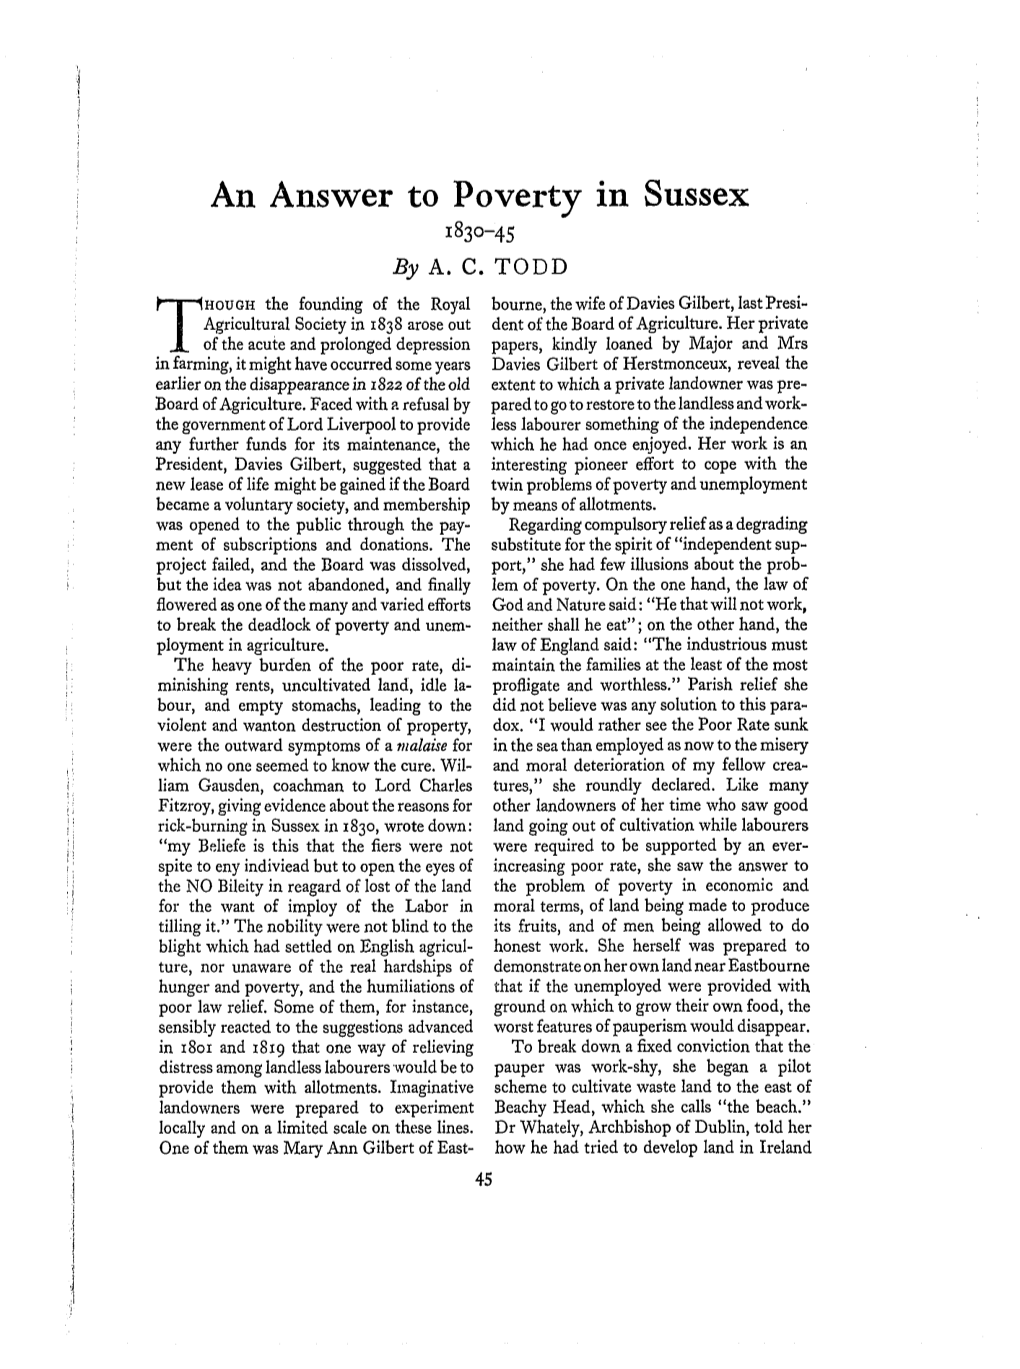 An Answer to Poverty in Sussex, 1830-45